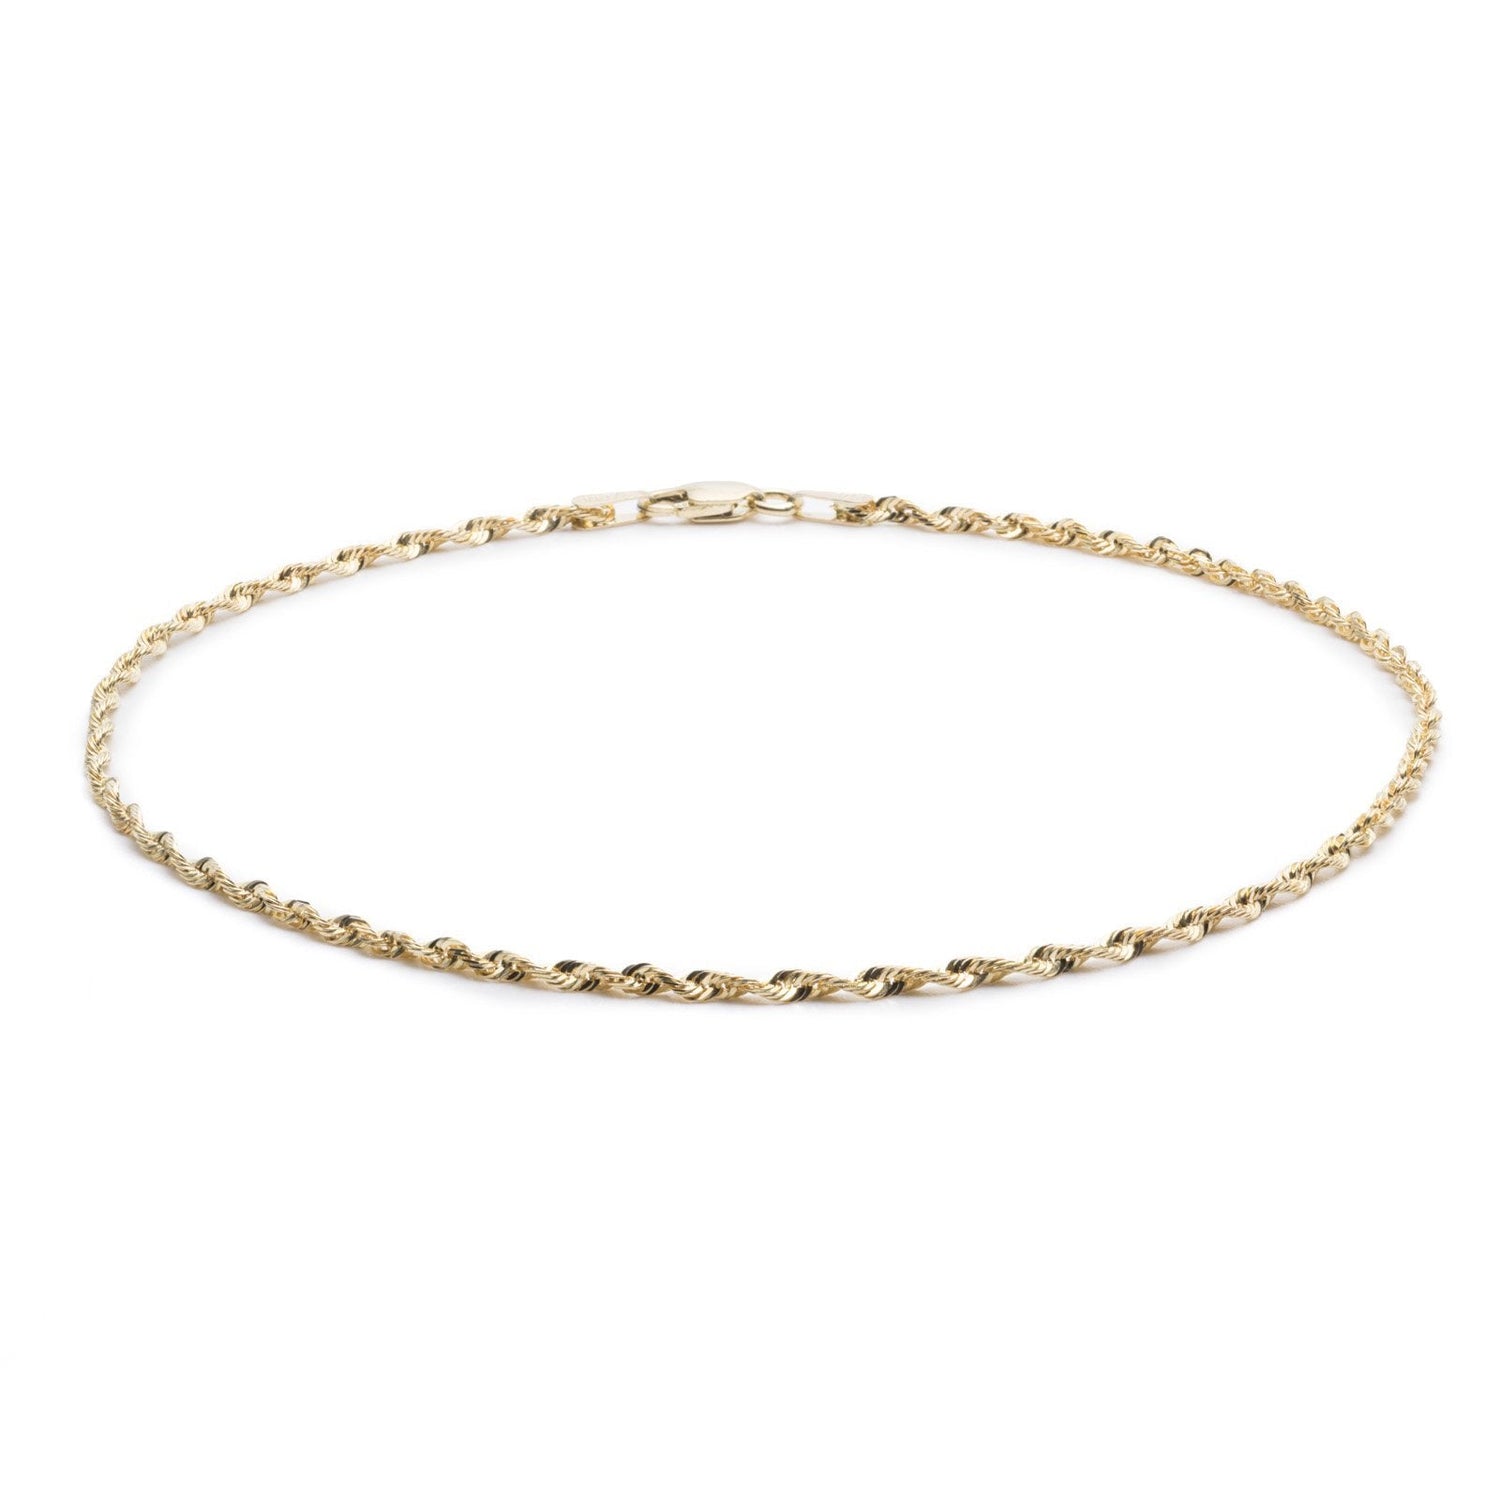 10k Yellow Gold 1.5mm Solid Multi Diamond Cut Rope Chain Bracelet and Anklet